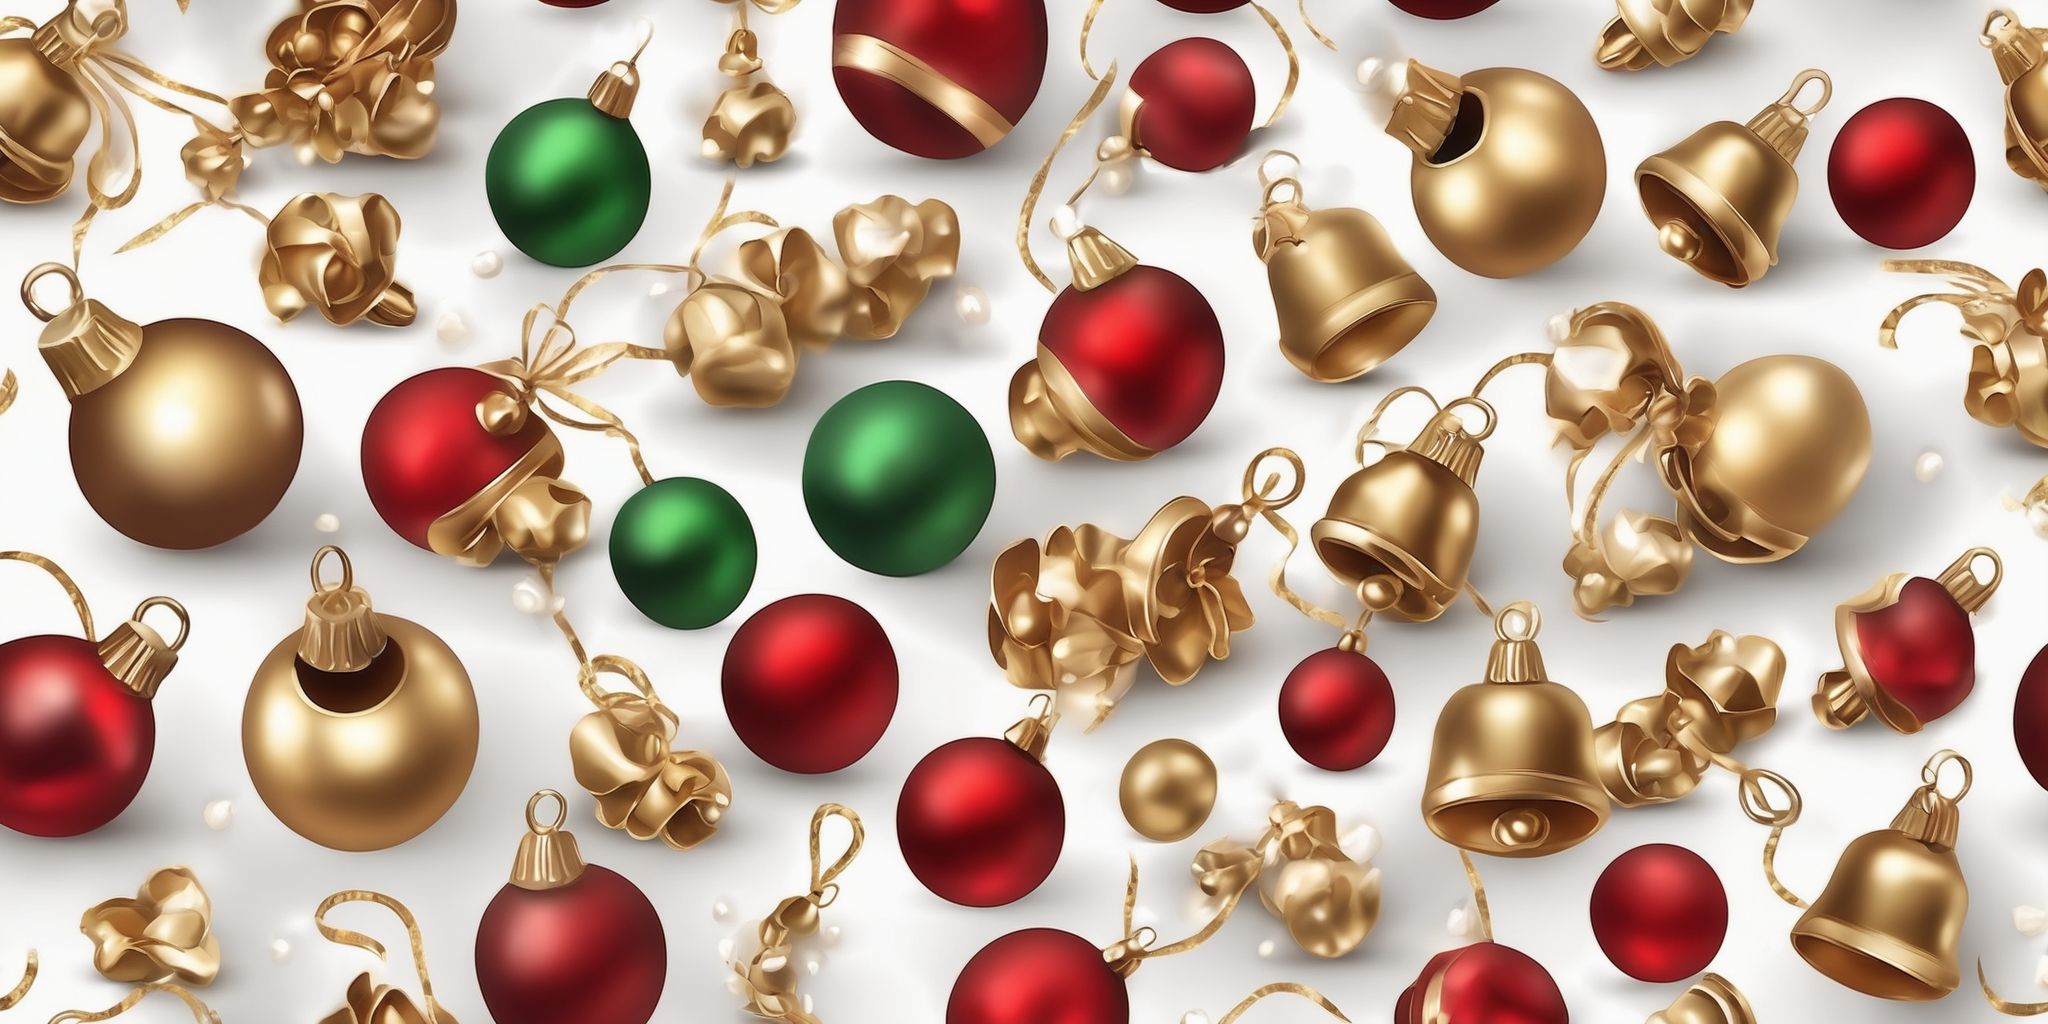 Jingle bells in realistic Christmas style